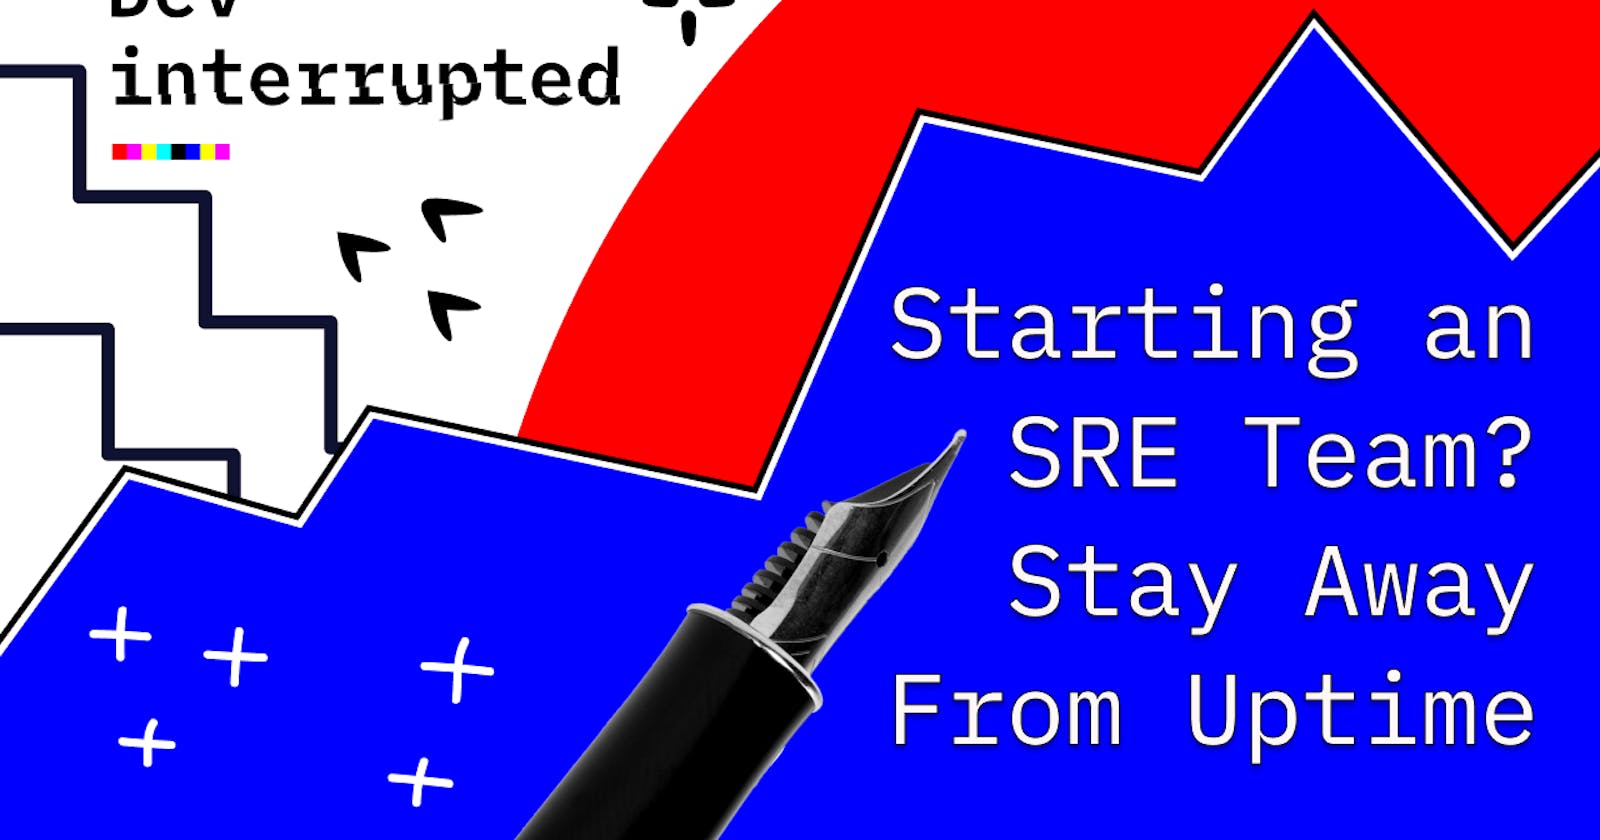 Starting an SRE Team? Stay Away From Uptime.